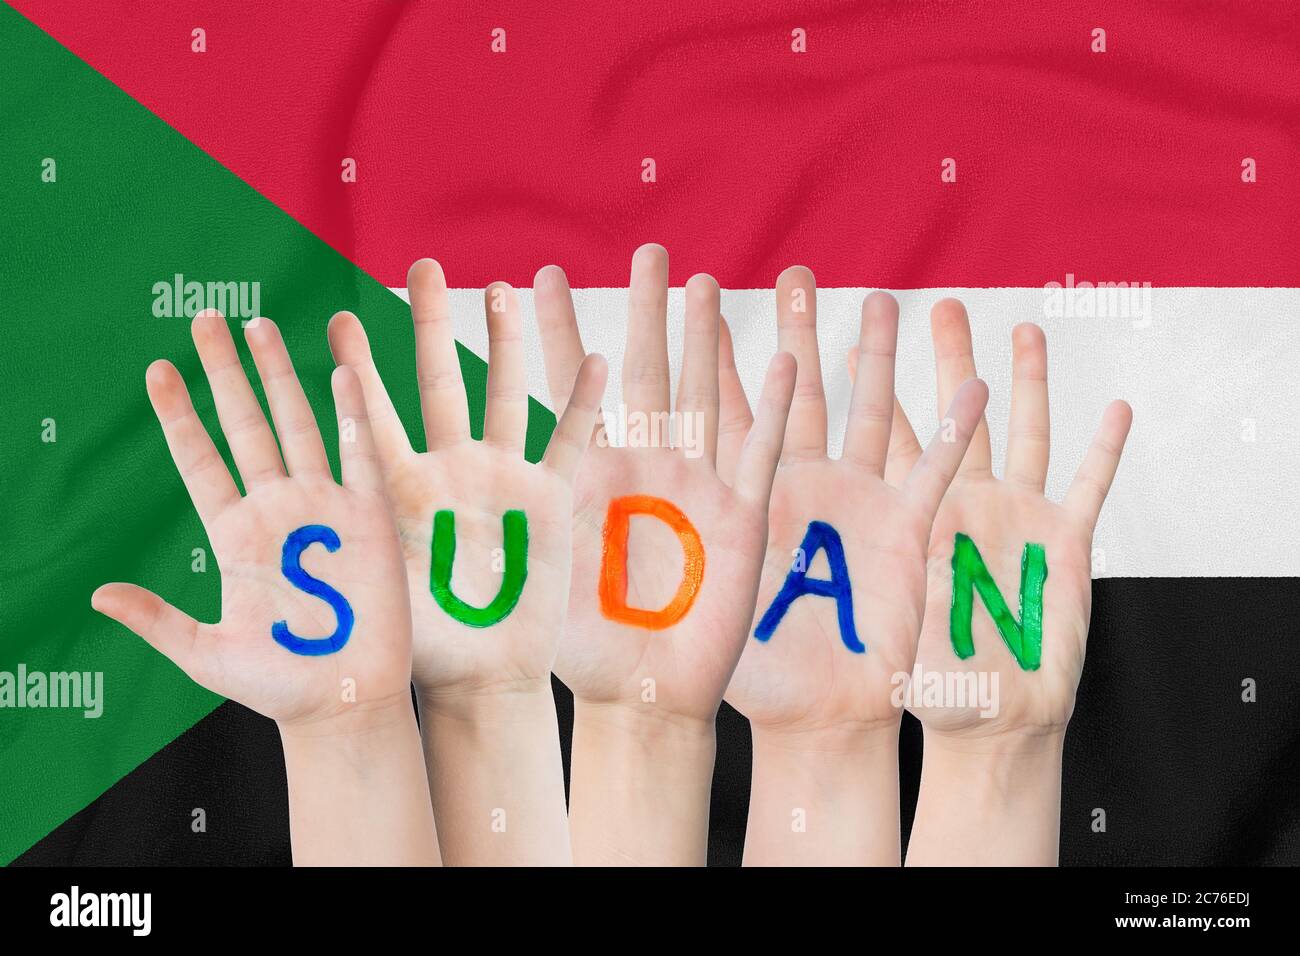 Inscription Sudan on the children's hands against the background of a waving flag of the Sudan Stock Photo